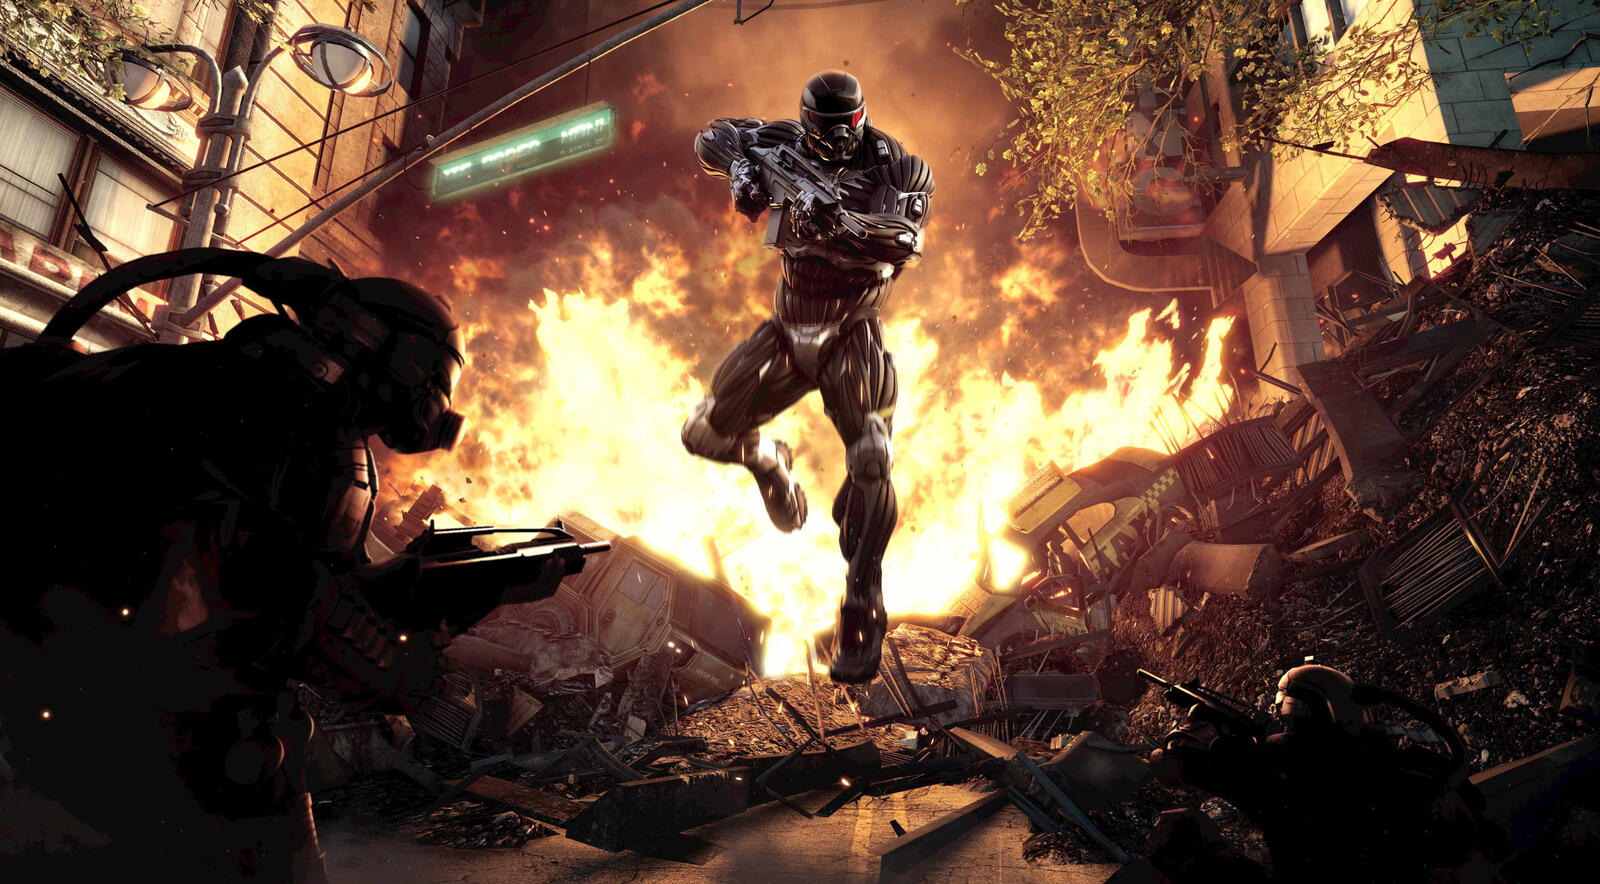 Wallpapers Crysis games Pc Games on the desktop